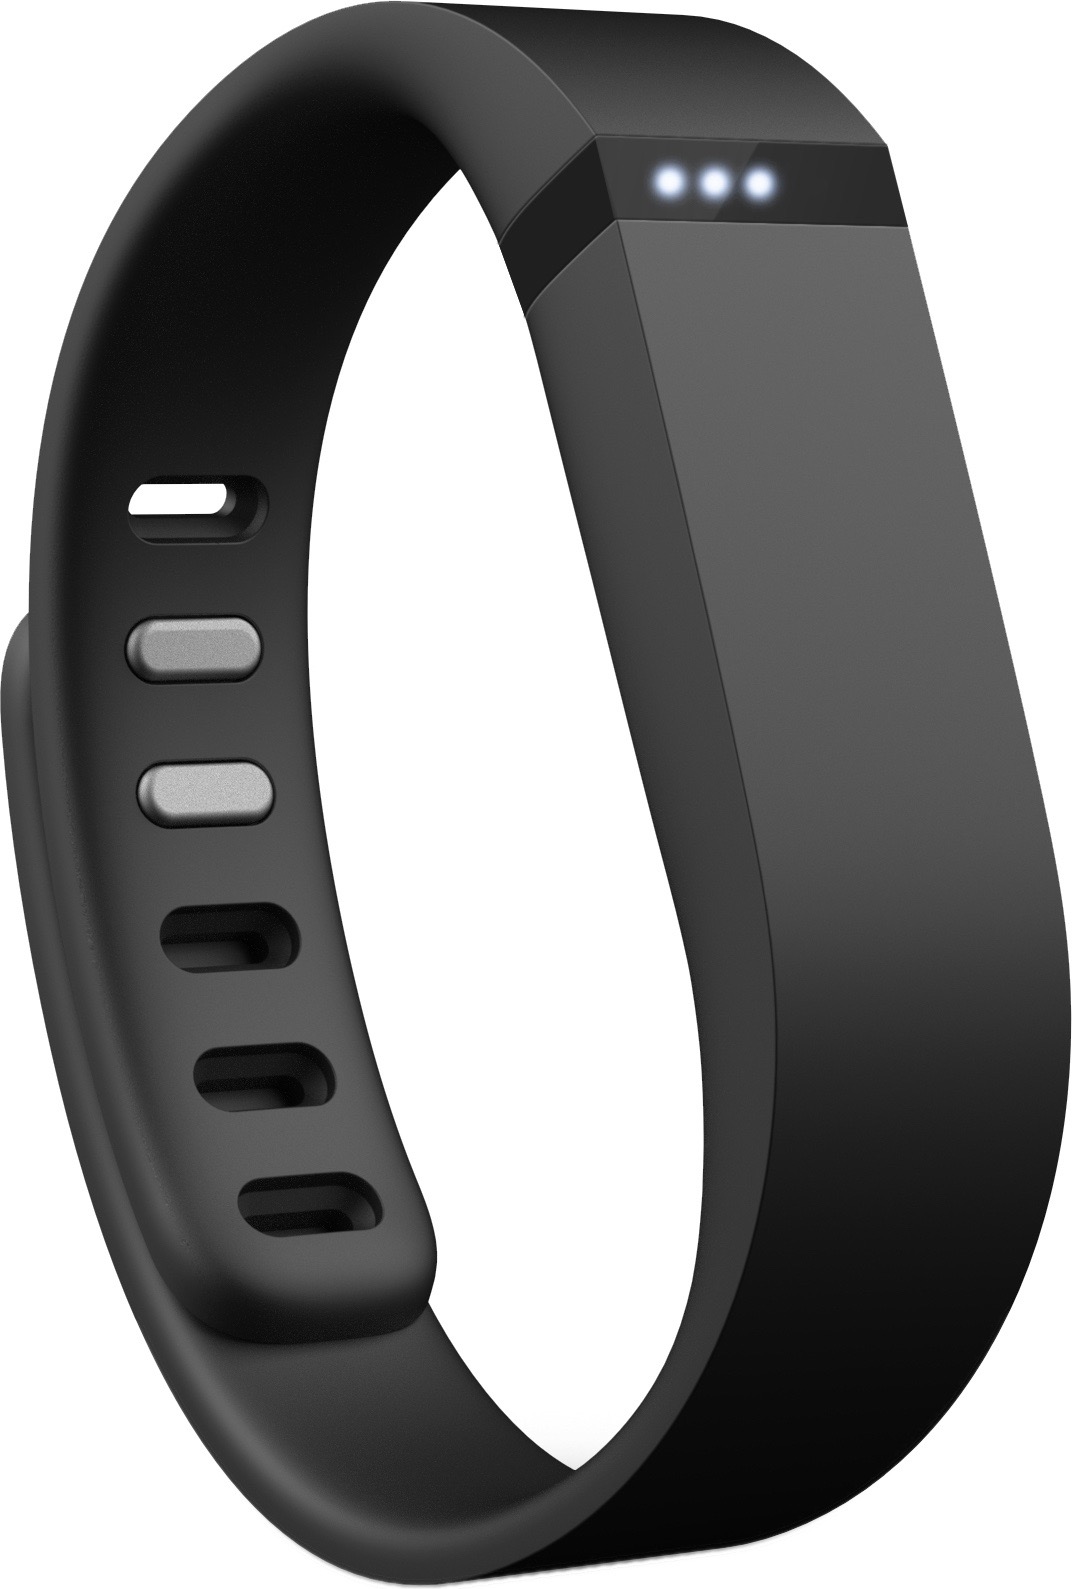 What's the cheapest Fitbit? | iMore